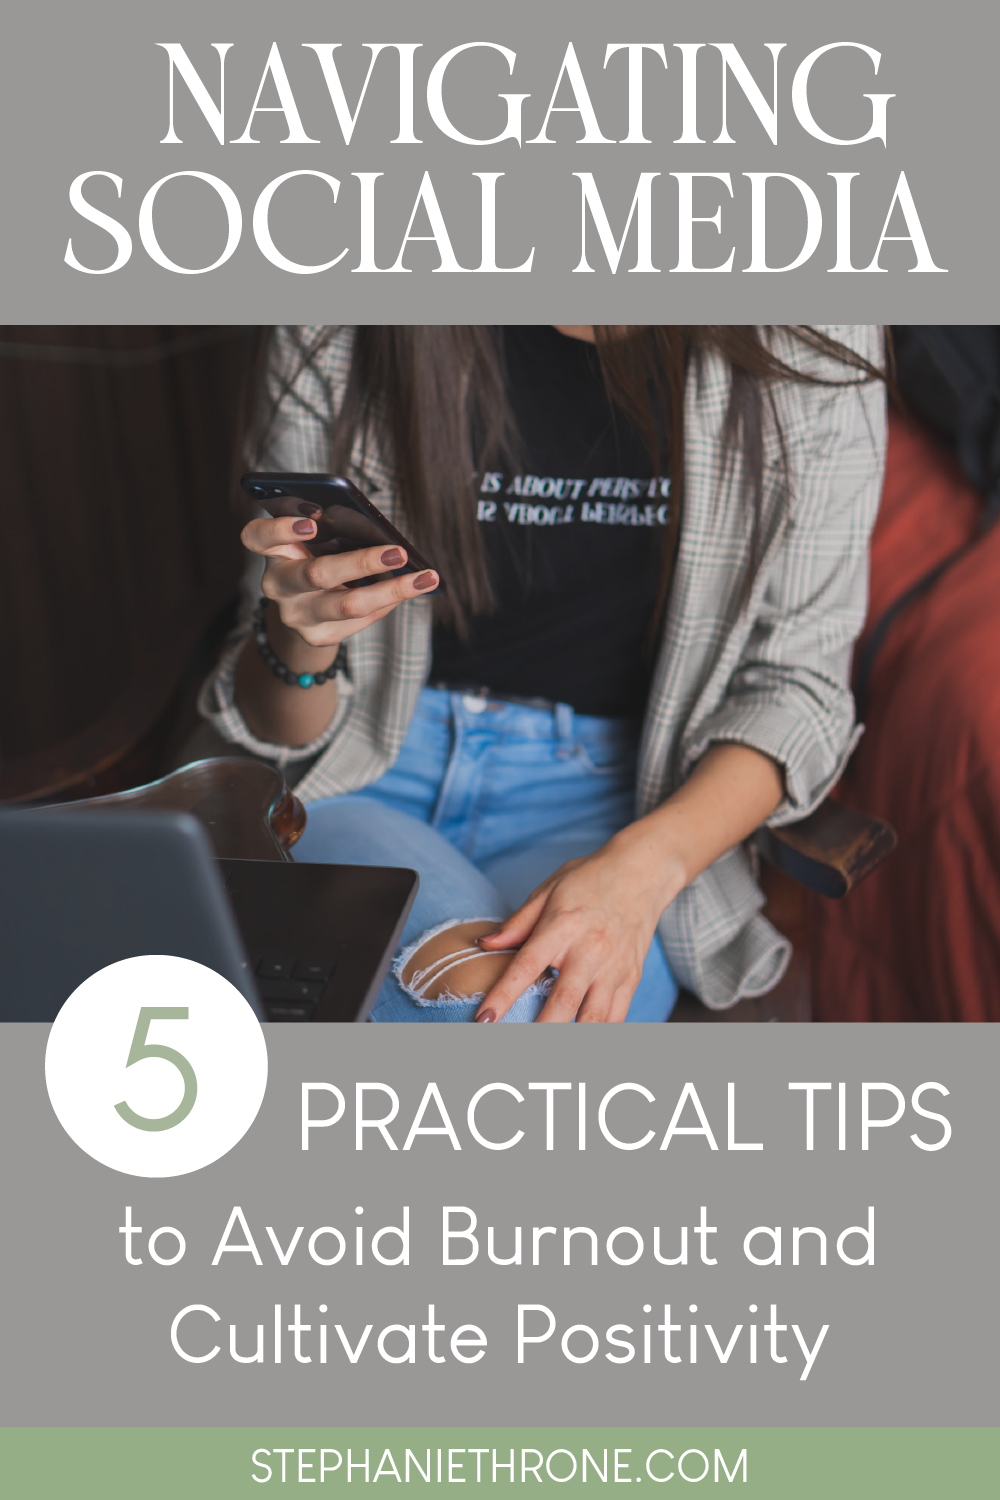 5 Tips to Avoid Social Media Burnout and Cultivate Positivity